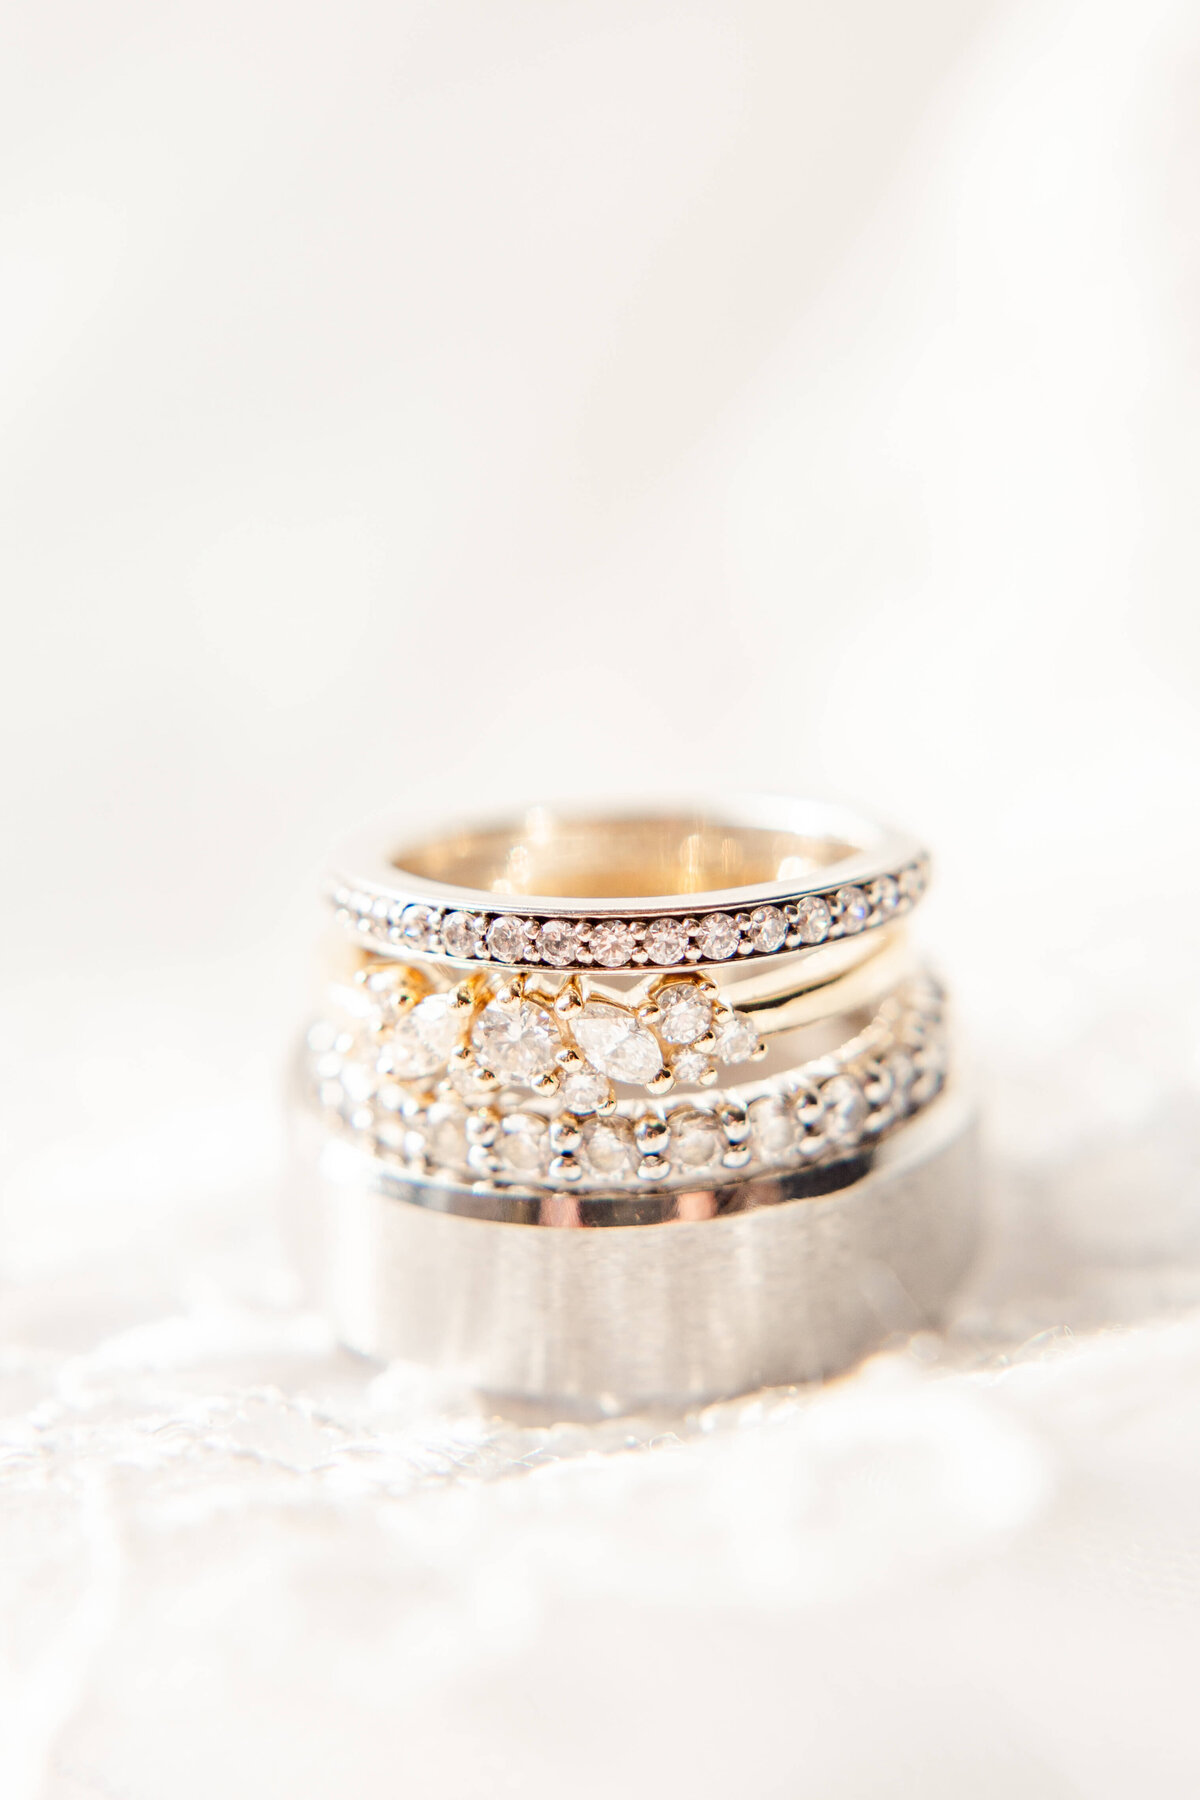 Wedding-engagement-rings-detail-shot-by-Bethany-Lane-Photography-5